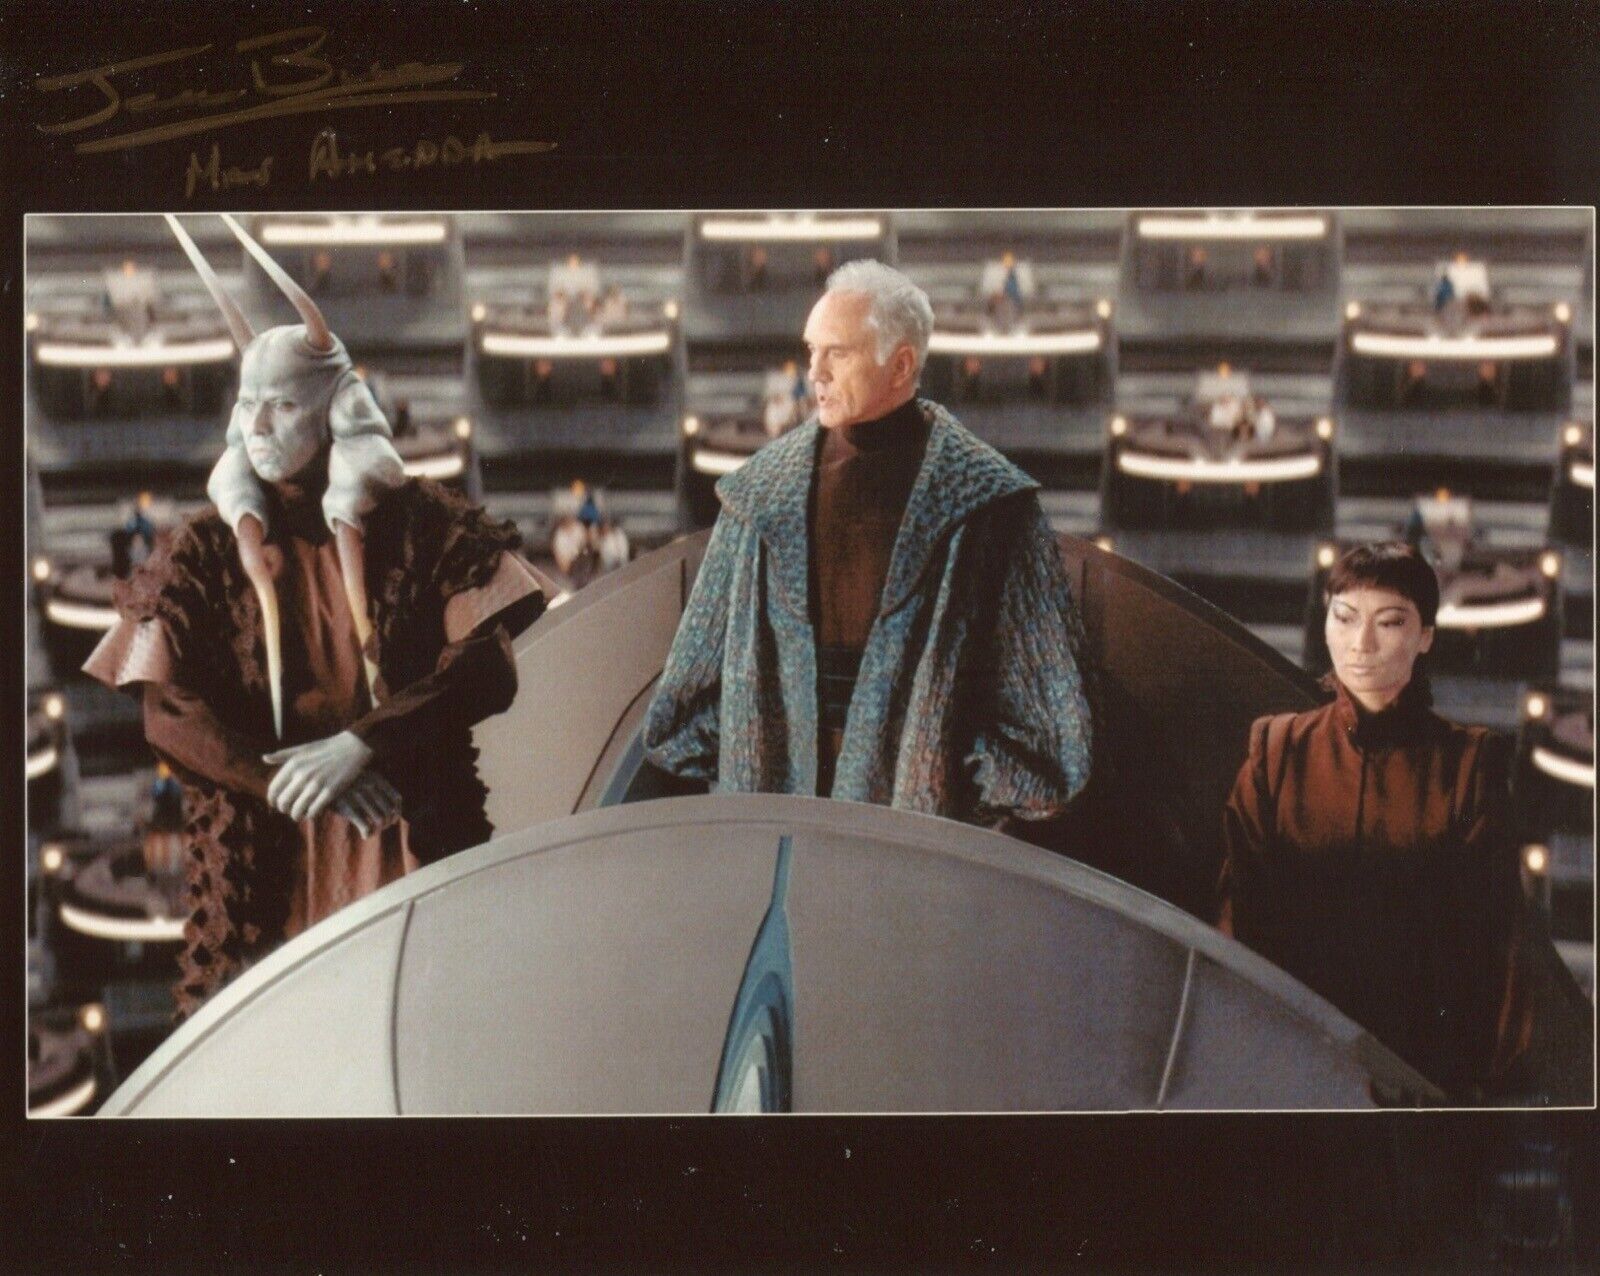 Star Wars Photo Poster painting signed by Jerome Blake as Mas Amedda